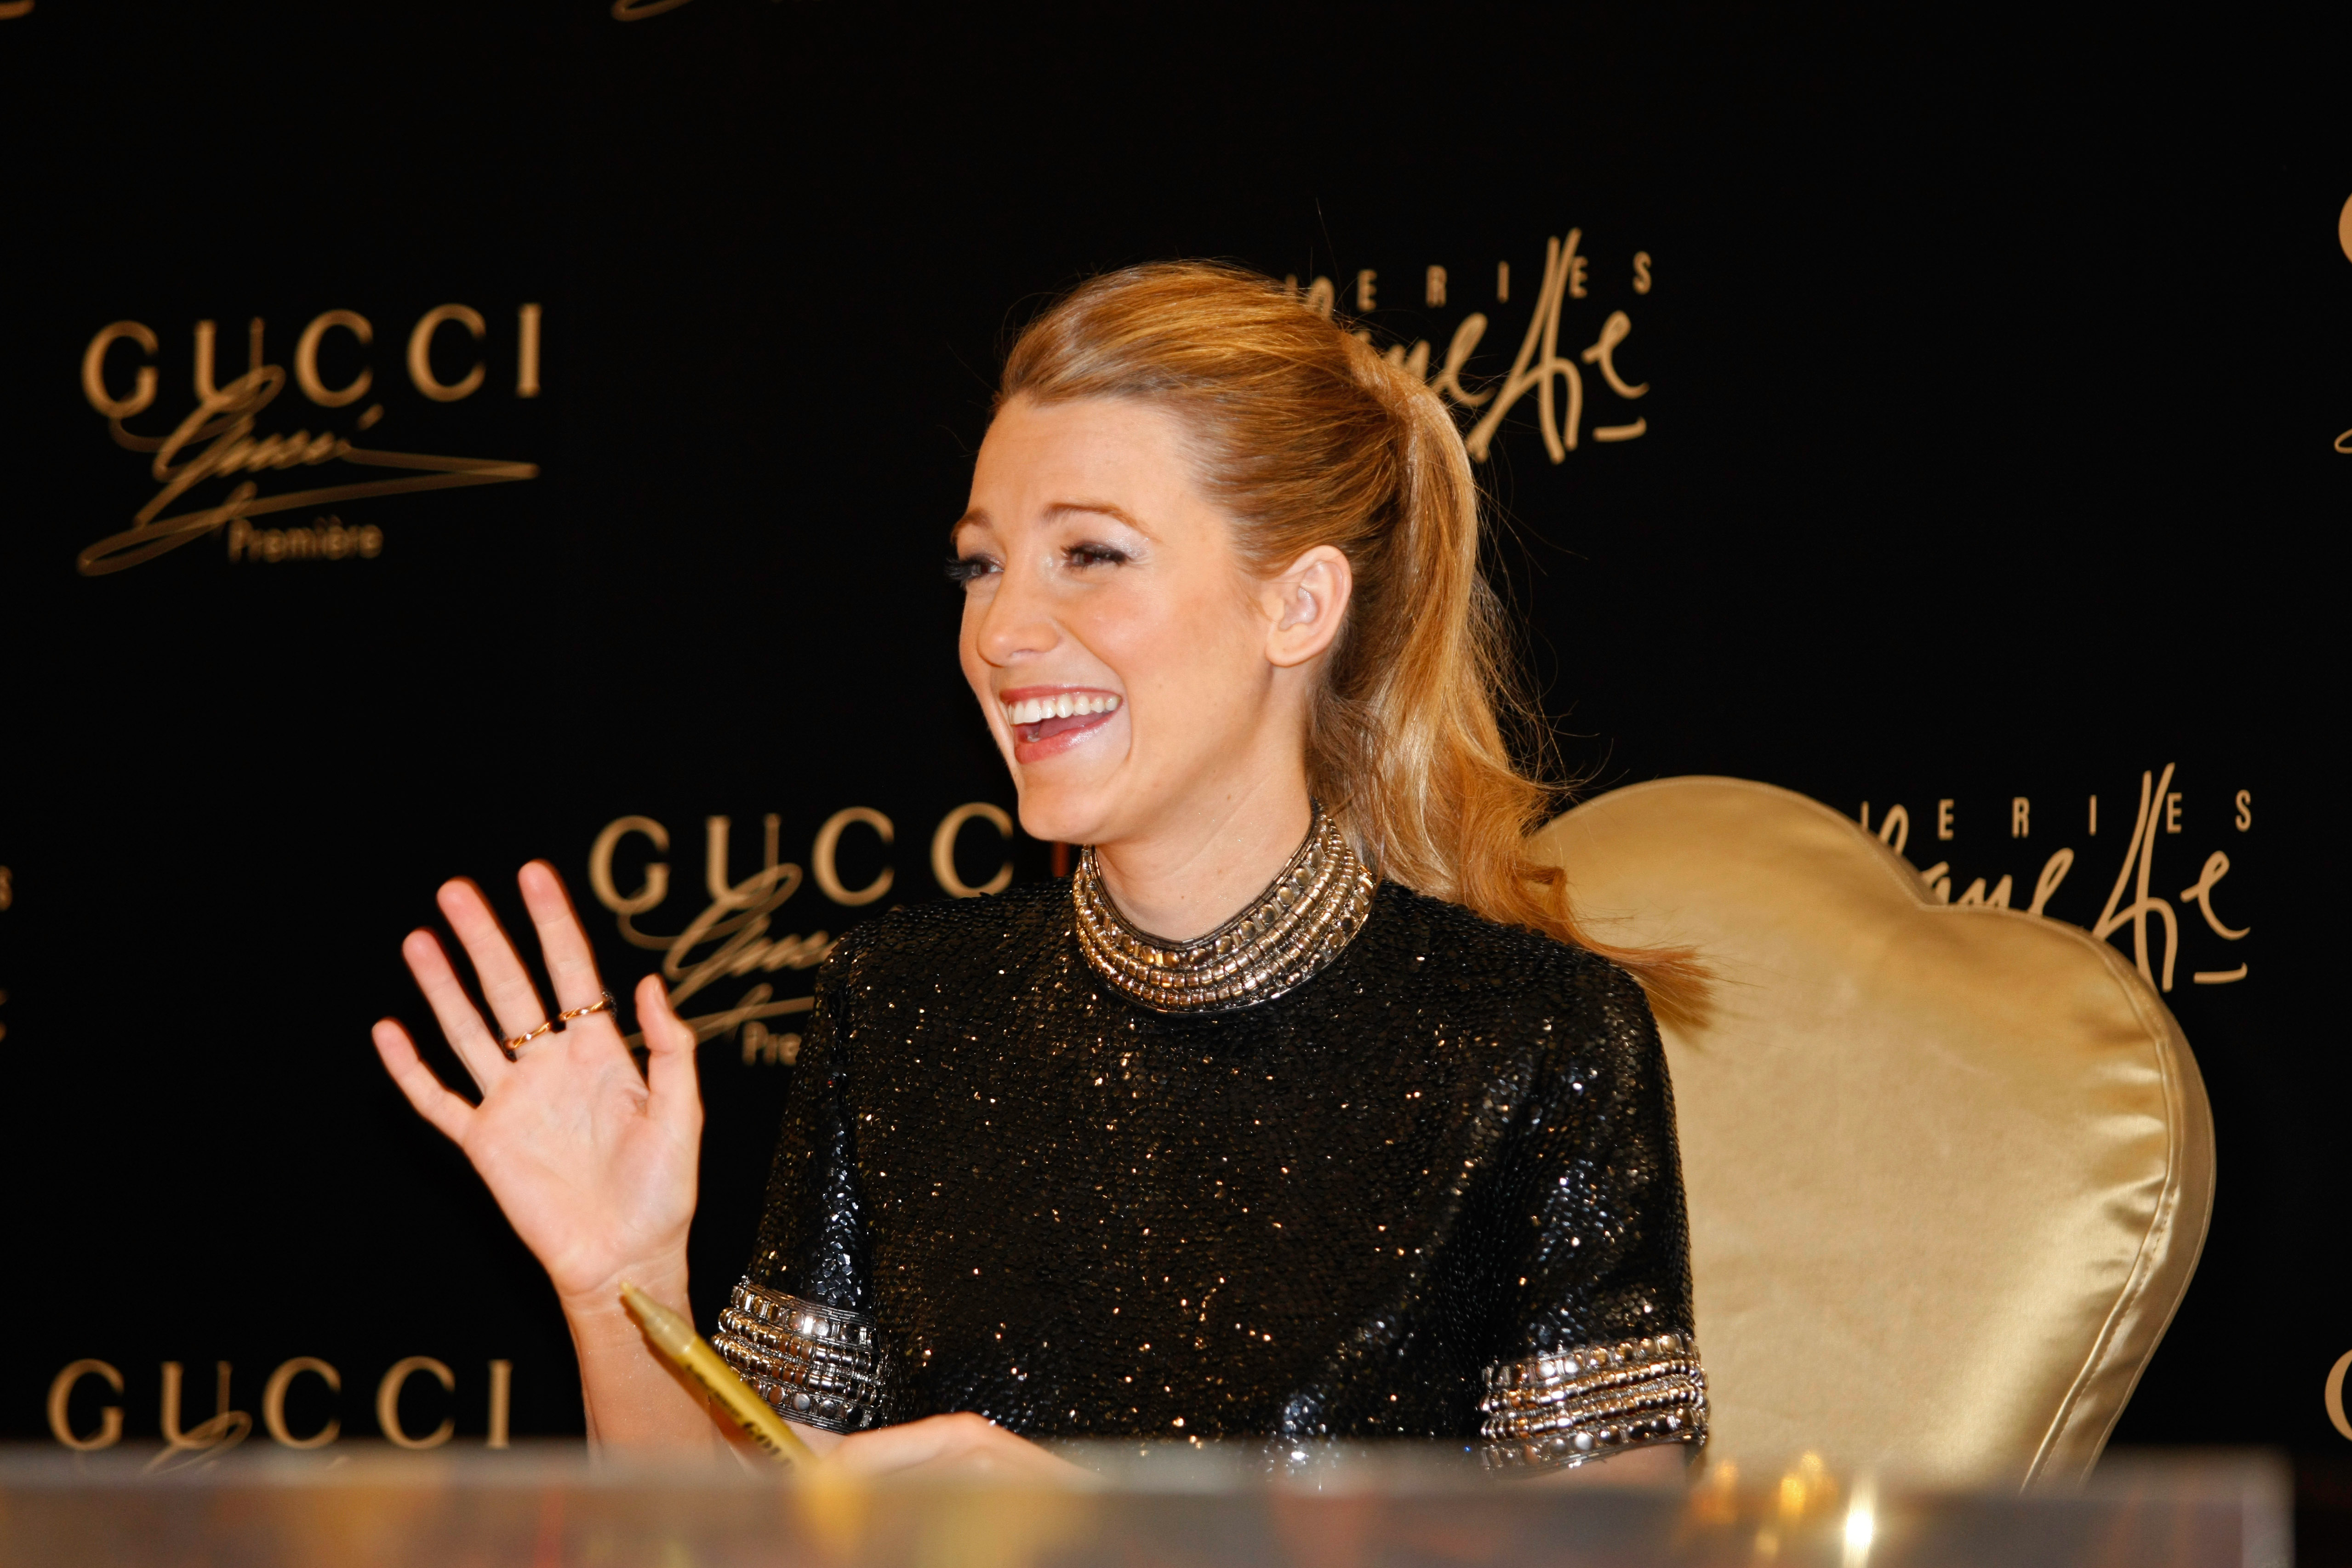 Blake Lively makes a personal appearance for Gucci In Dubai